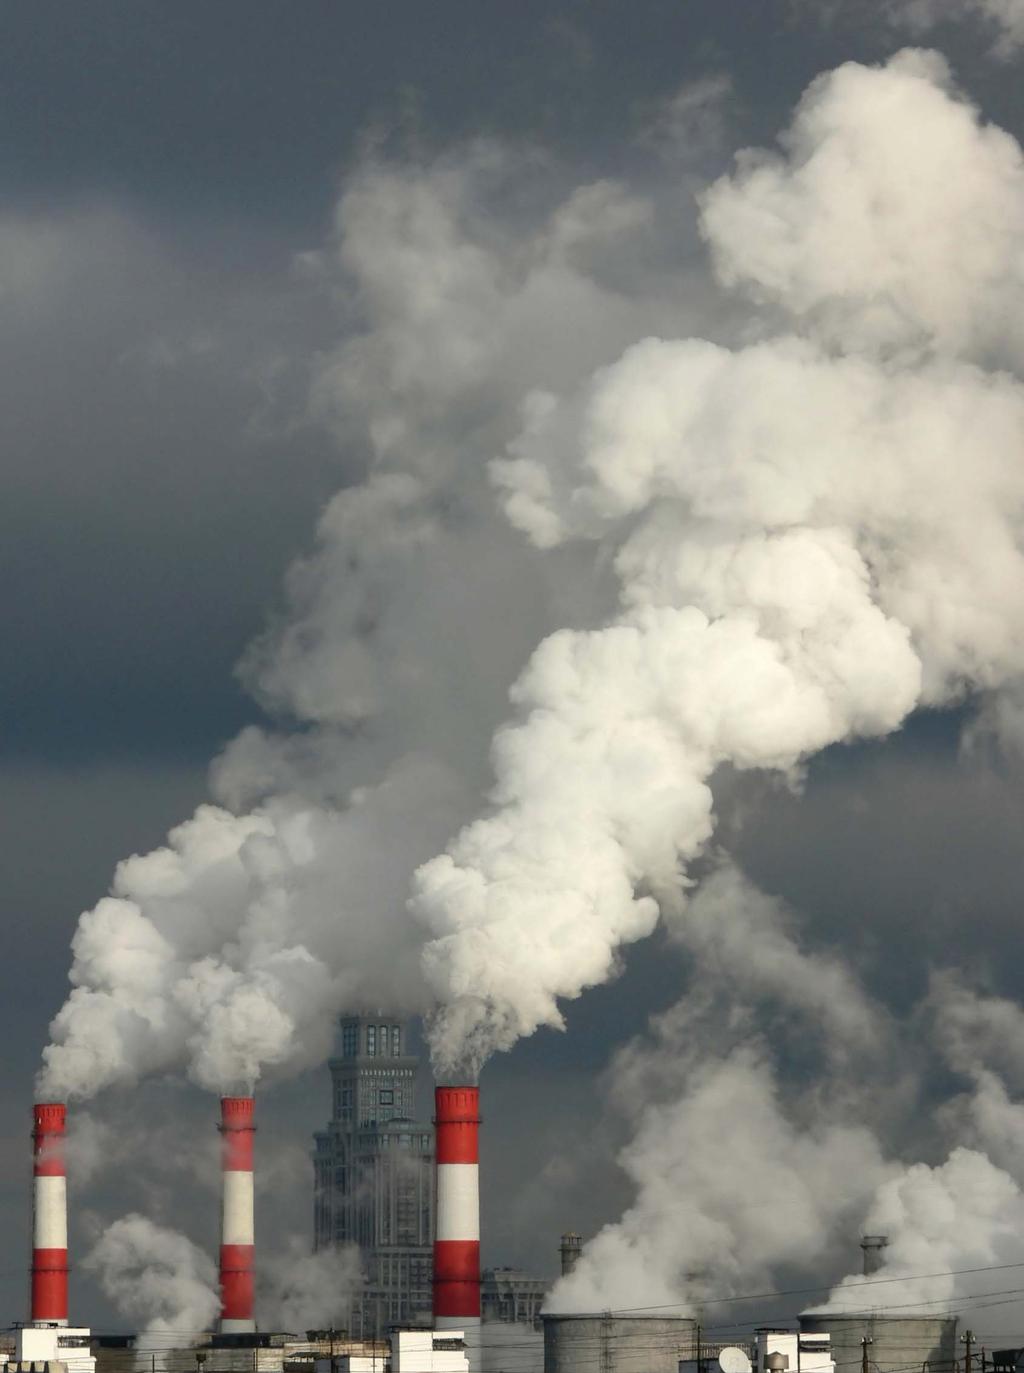 According to the law of matter, emissions from stacks such as these do not simply disappear but